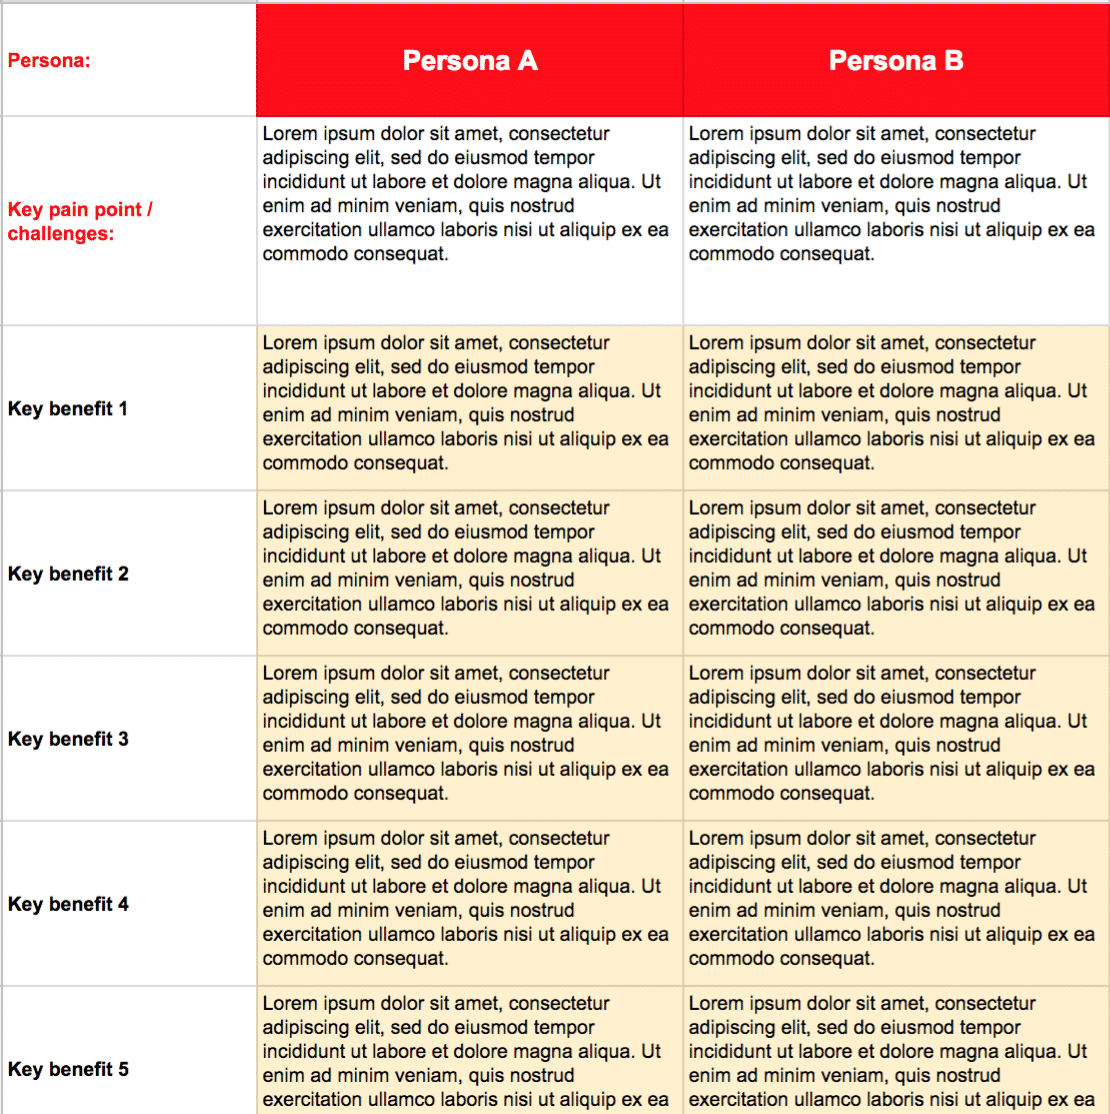 Here’s the persona / benefit grid